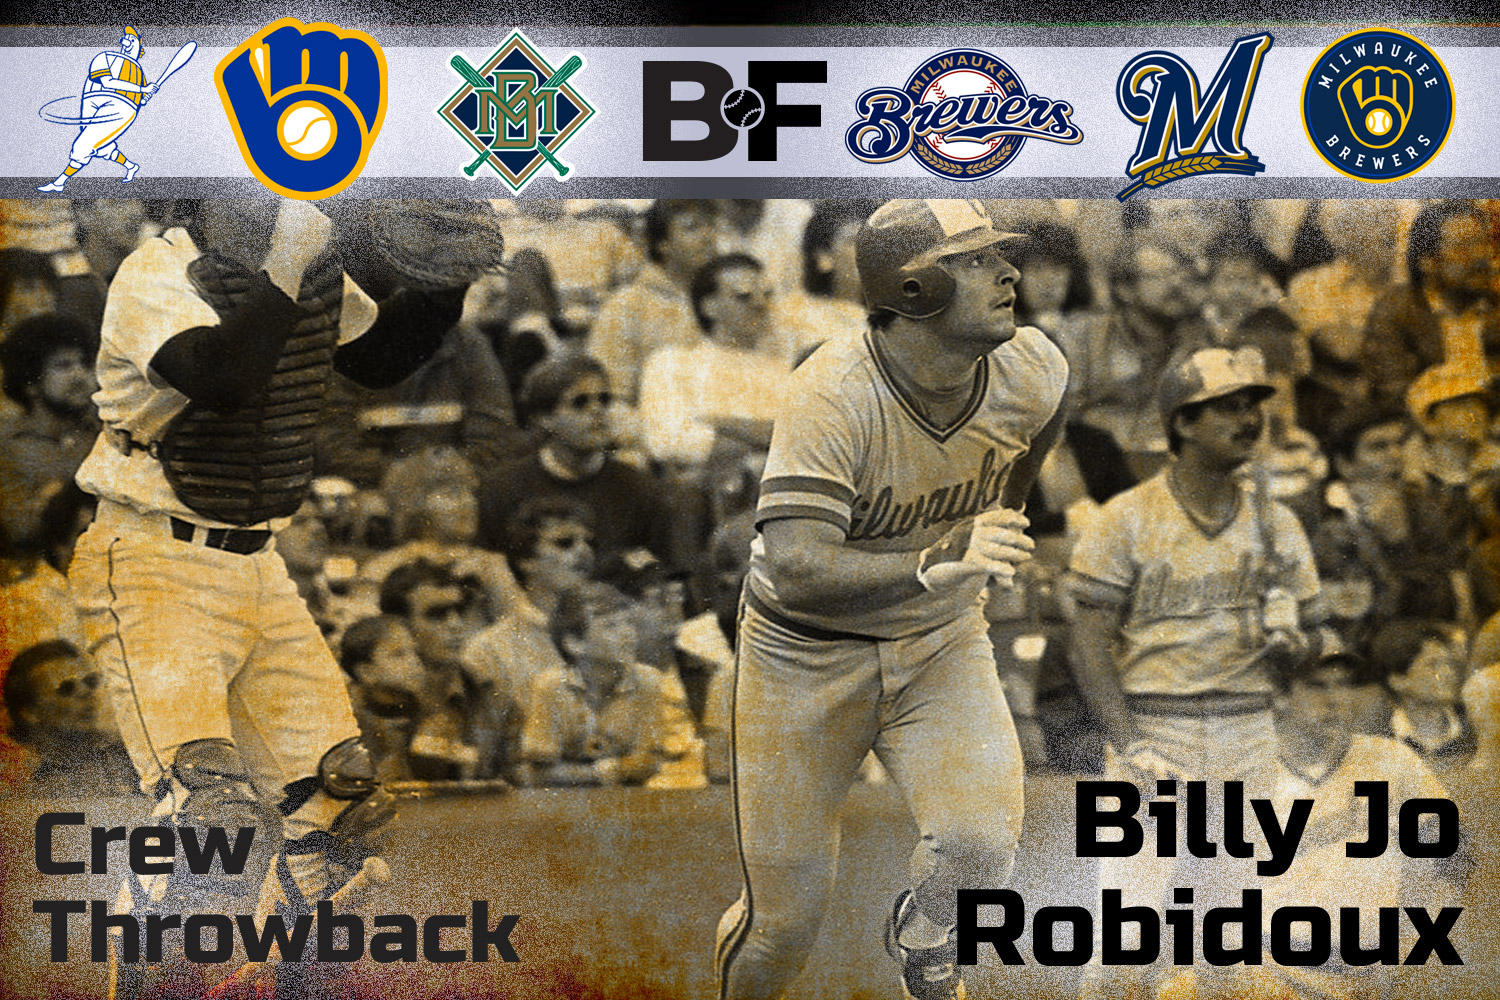 Billy Jo Robidoux Produced One of the Finest Minor League Seasons